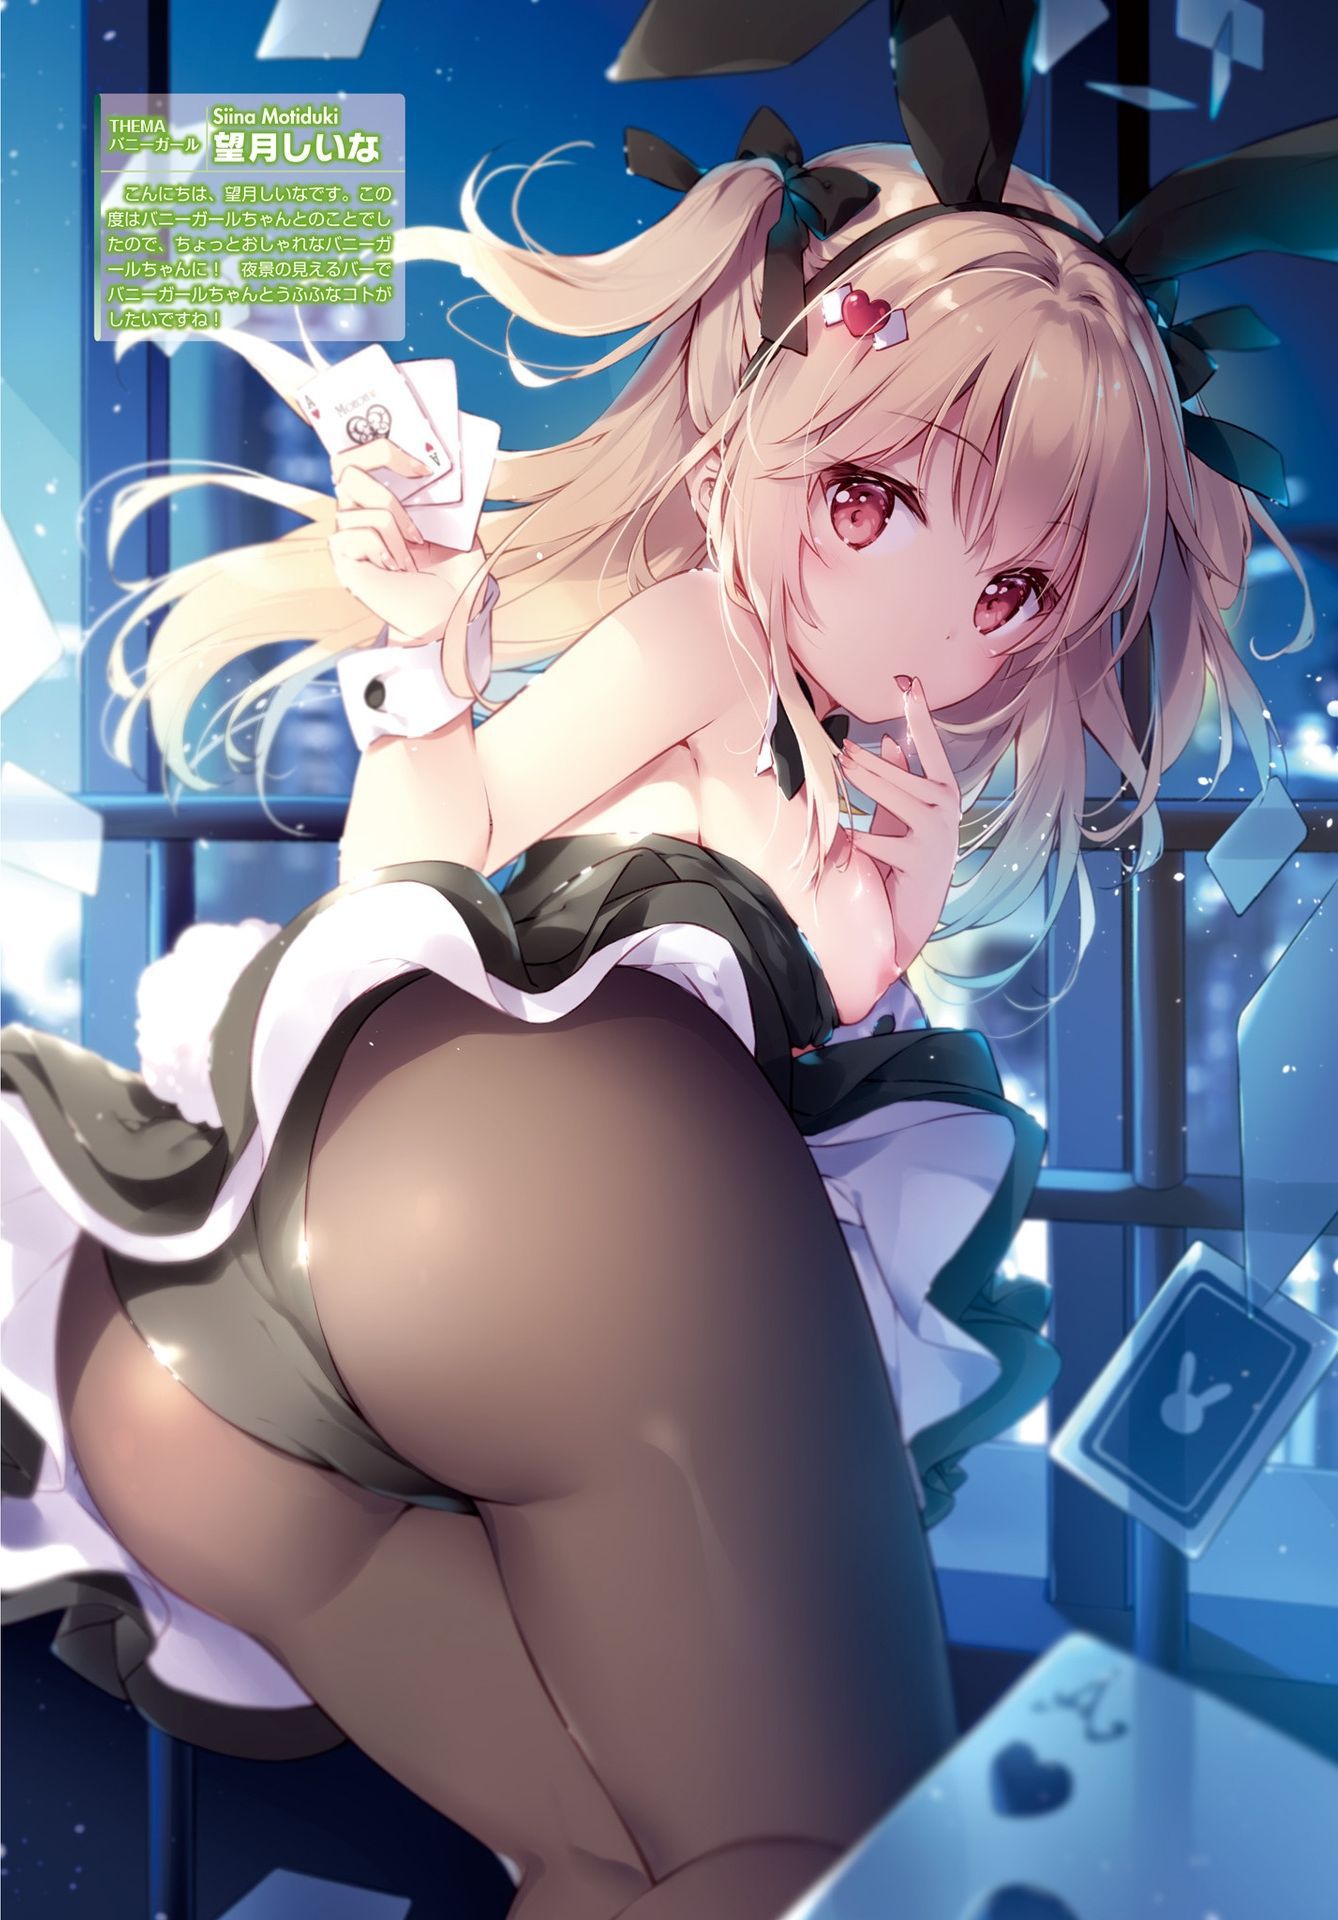 [Second] sexy bunny girl figure secondary erotic image part 35 [Bunny Girl] 6